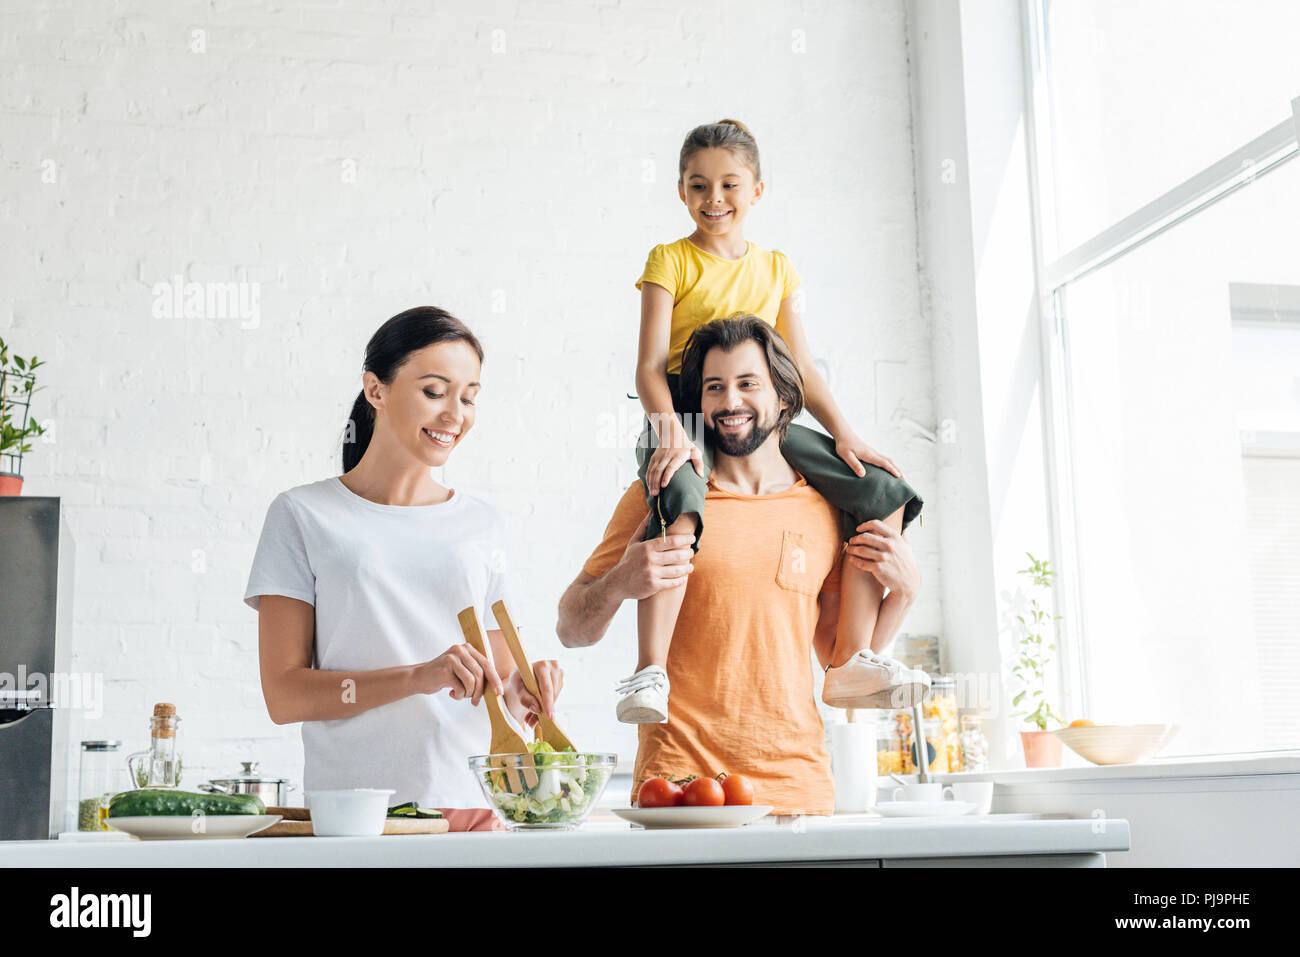 smiling young woman preparing salad while her daughter riding on shoulders of husband at kitchen Stock Photo